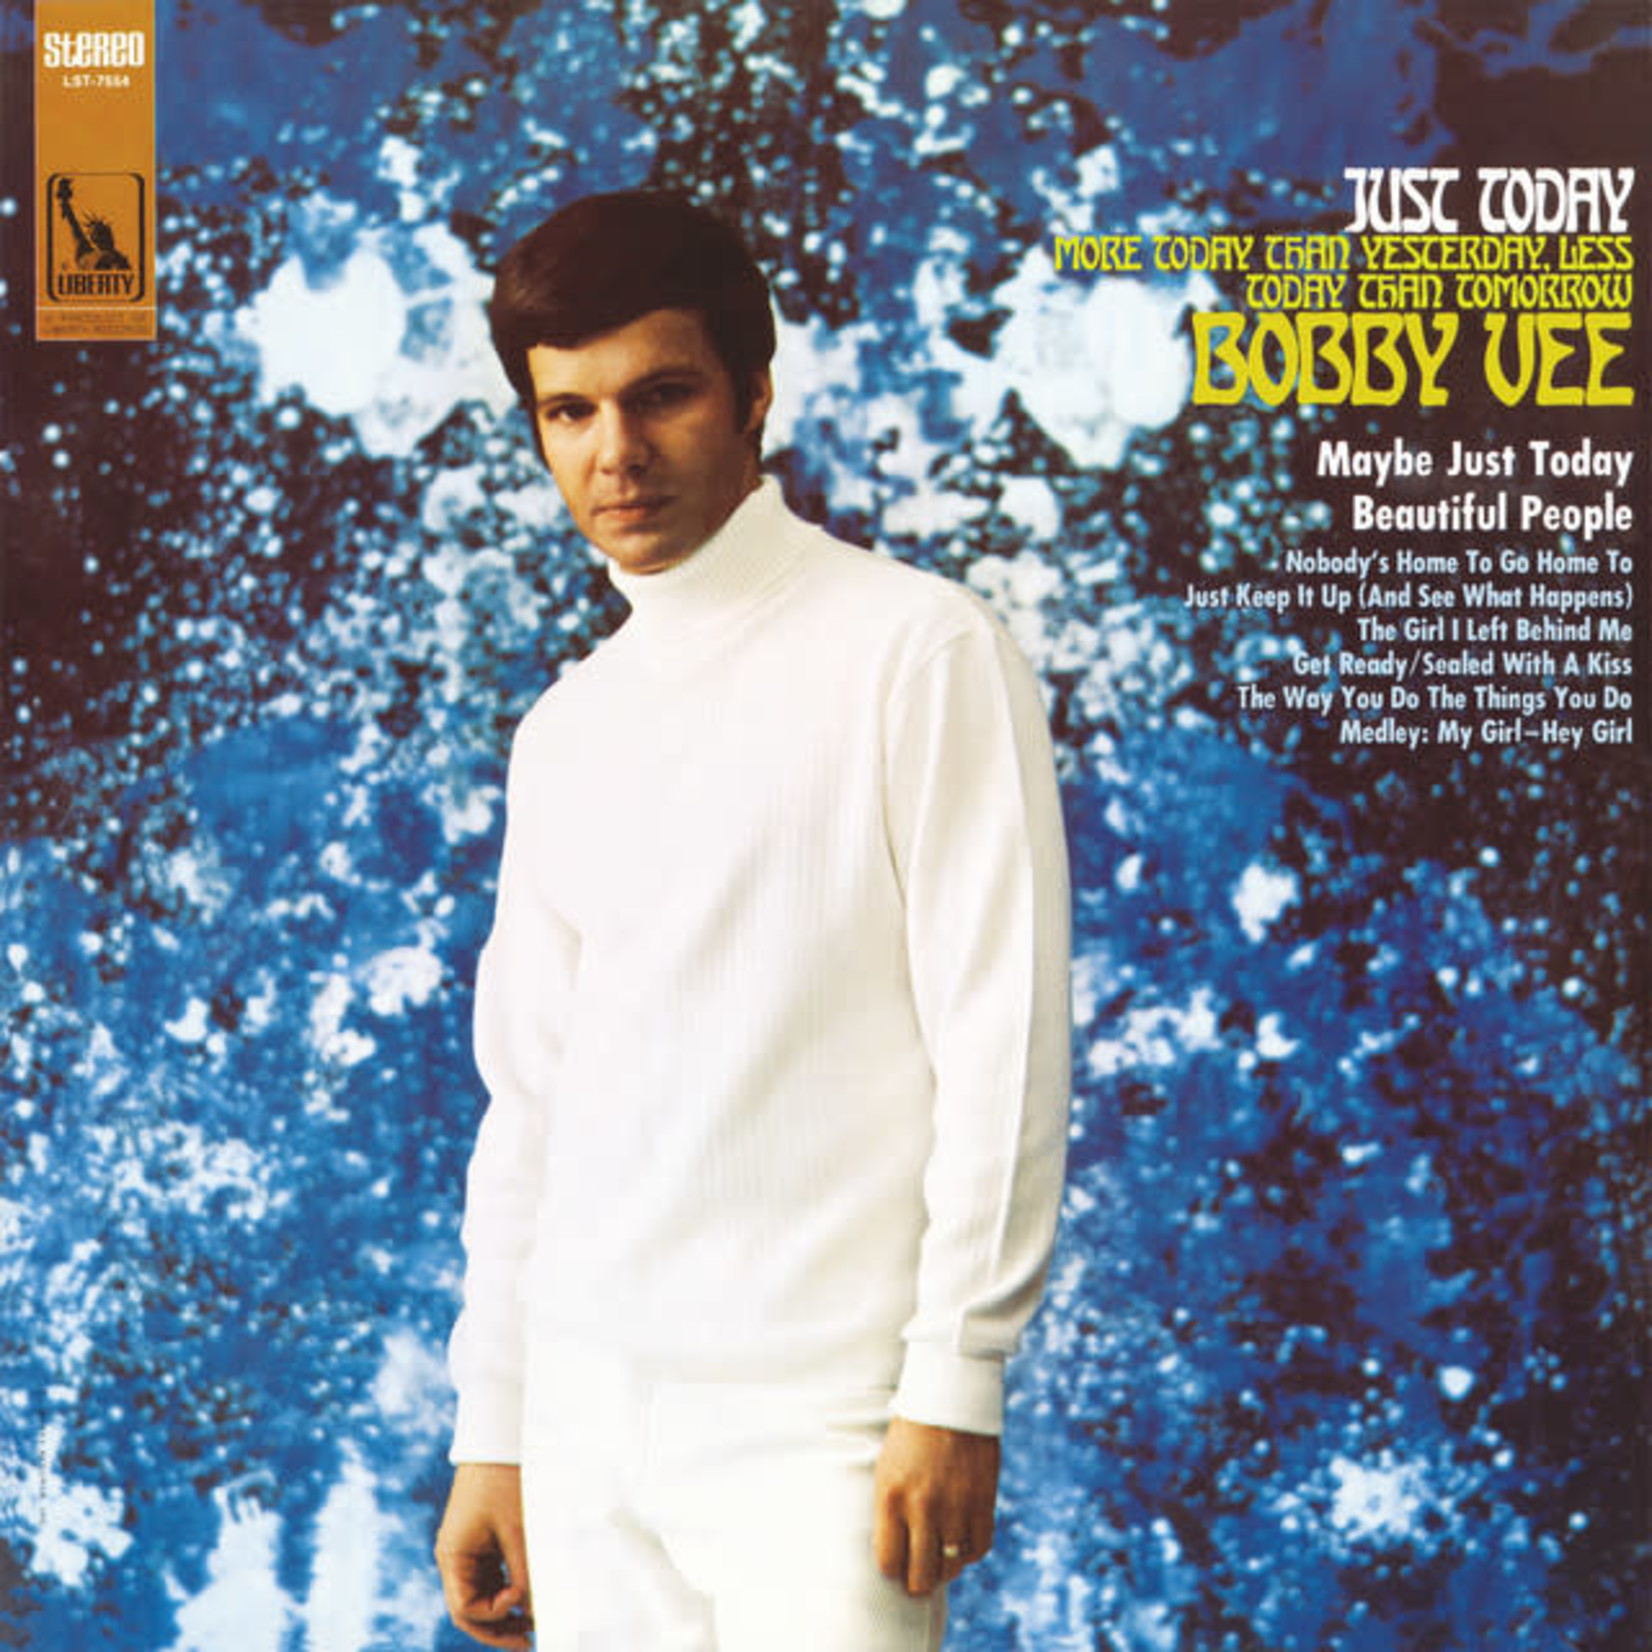 [Discontinued] Bobby Vee - Just Today